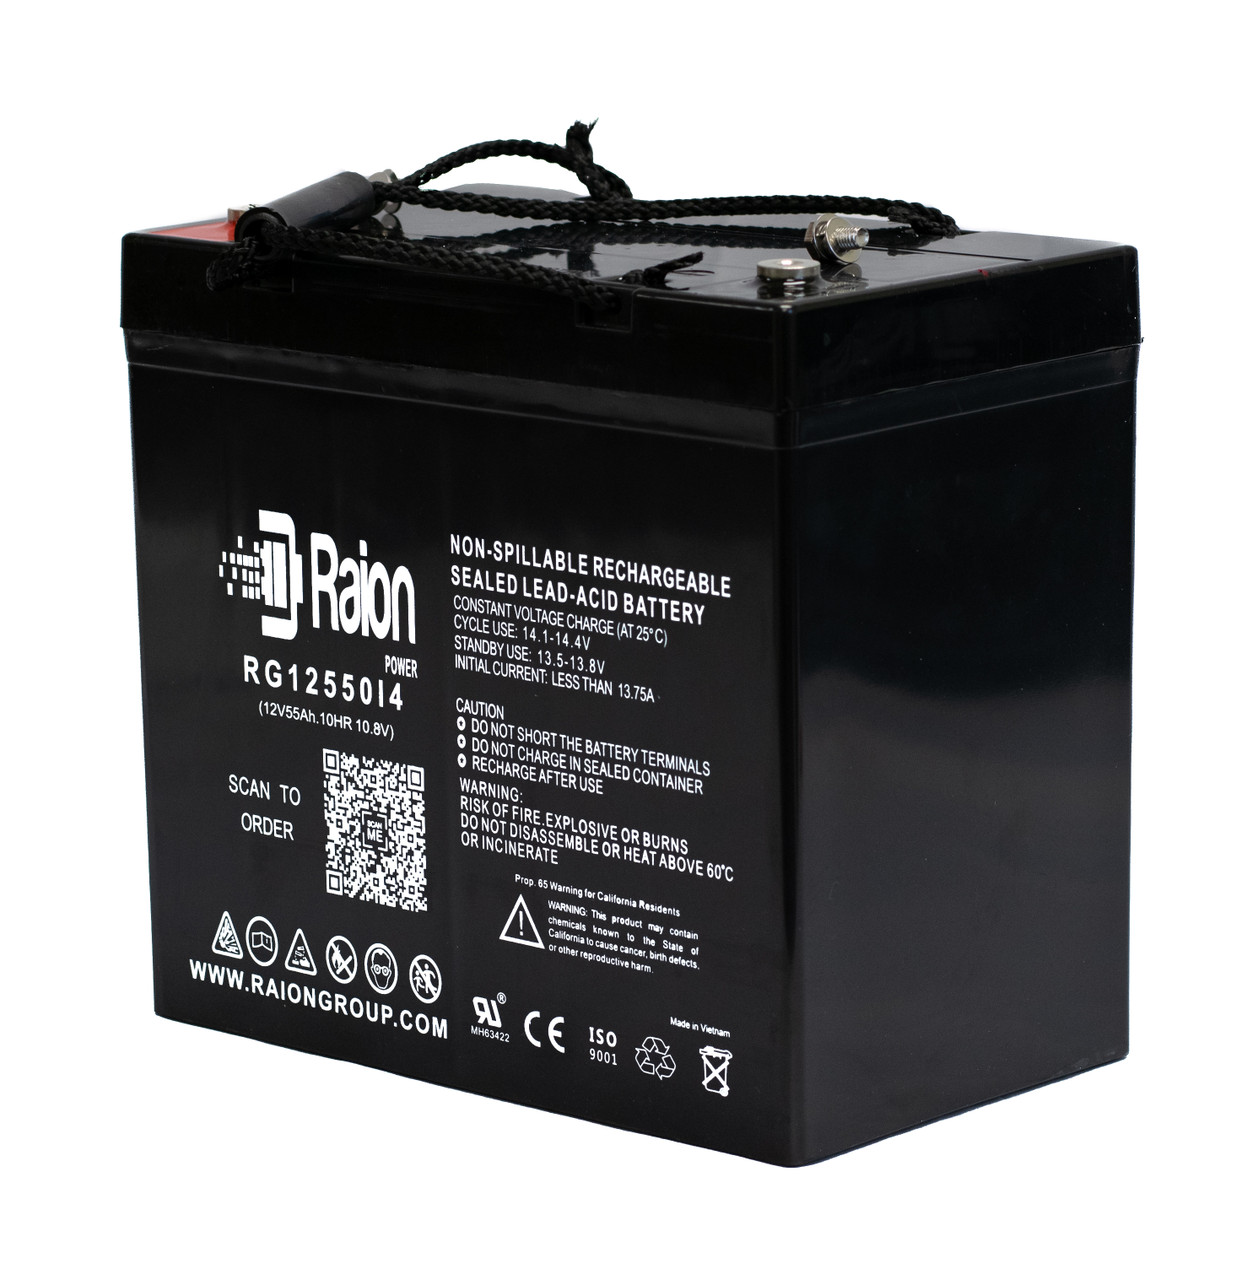 Raion Power 12V 55Ah 22NF Mobility Scooter Battery Replacement for Quickie V121